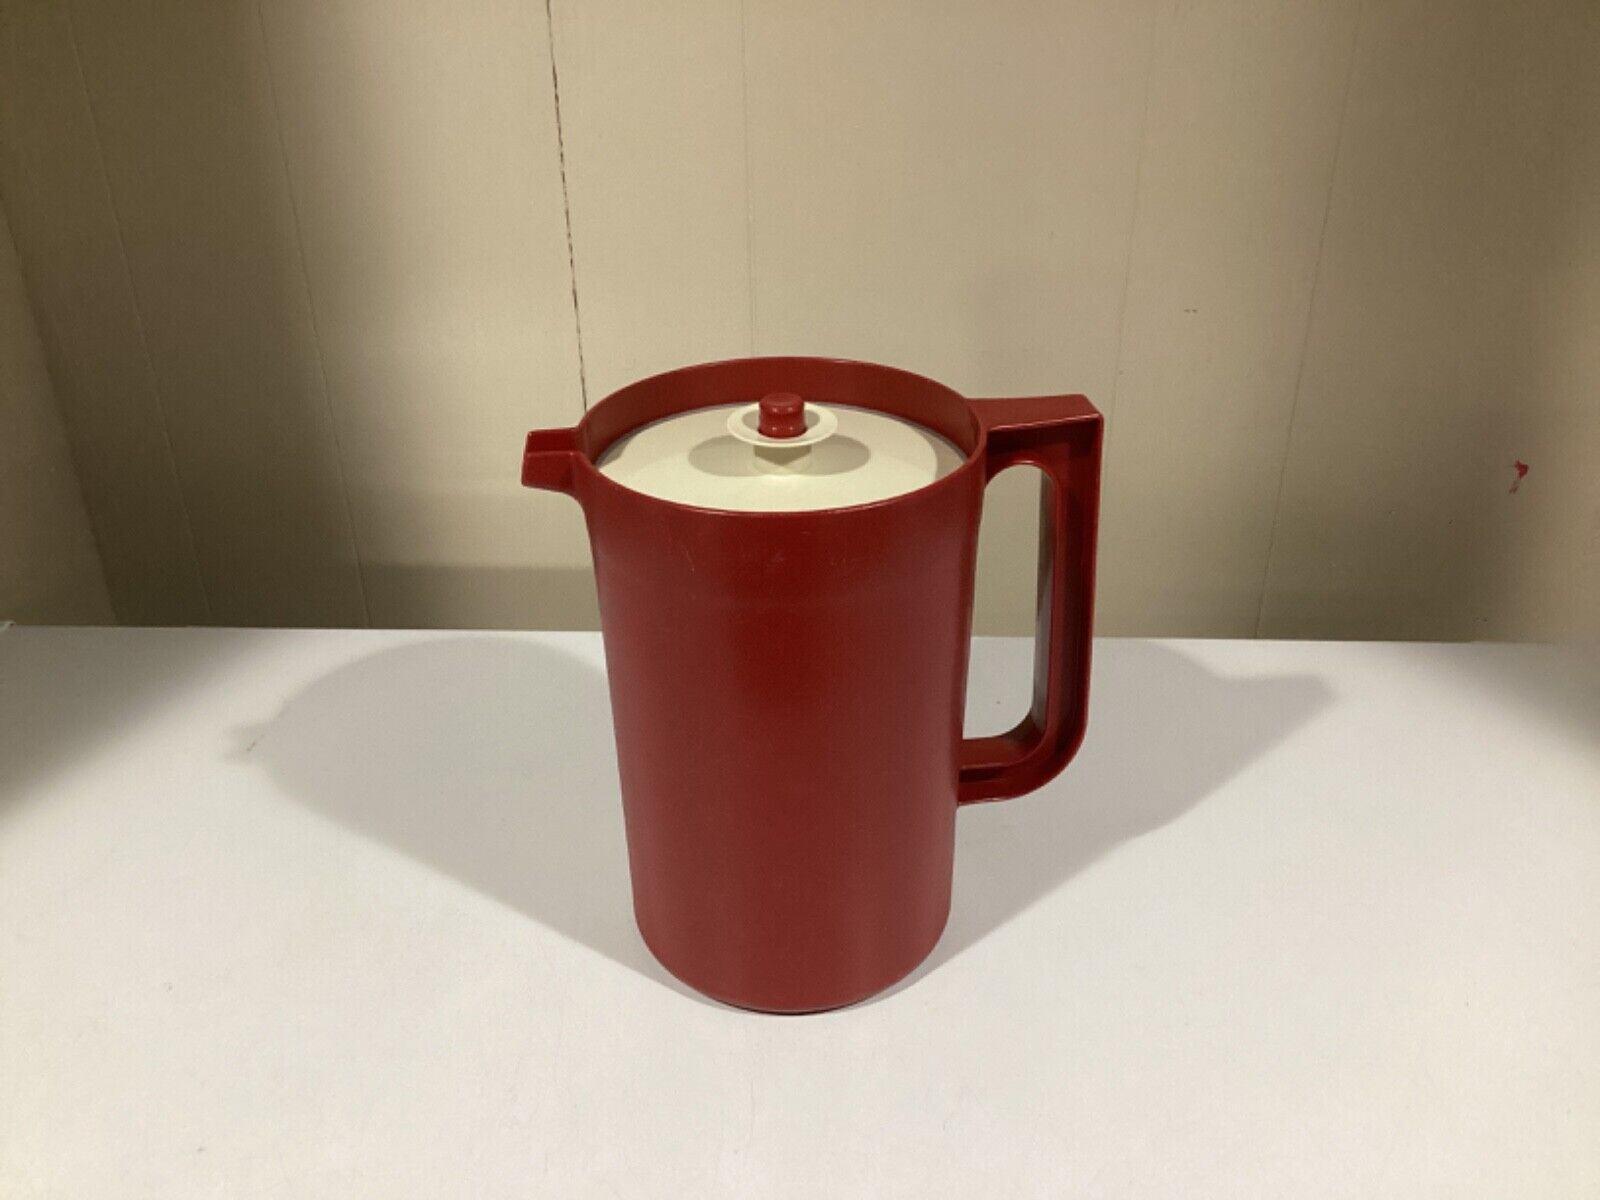 VINTAGE RED TUPPERWARE 1 QUART PITCHER   WITH PUSH BOTTON LID 1676-2 